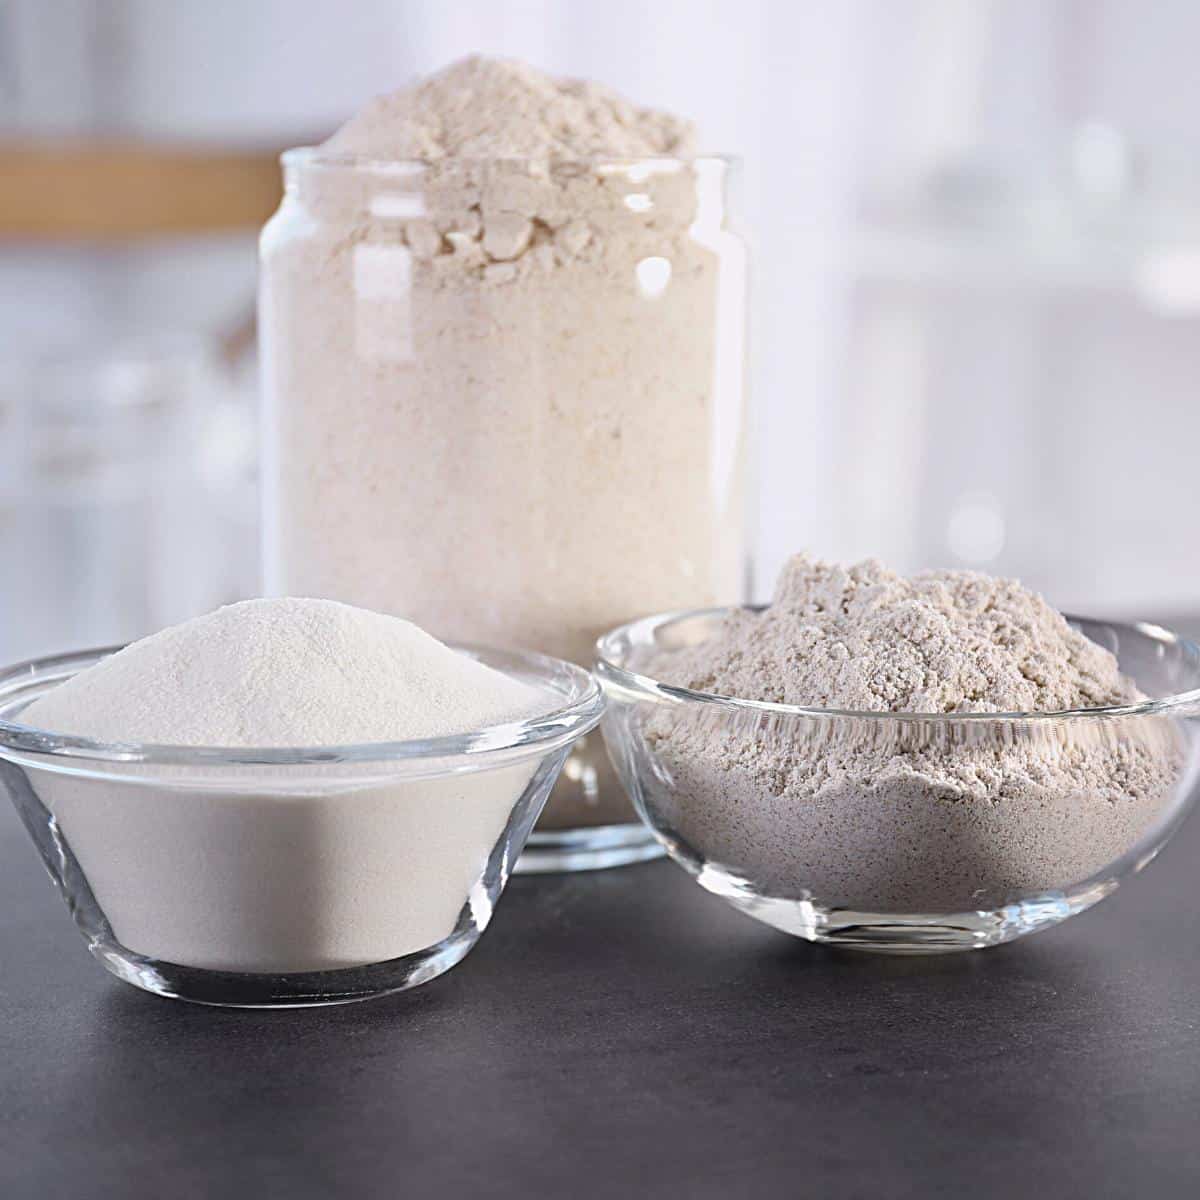 Jars of pastry flour for baking.